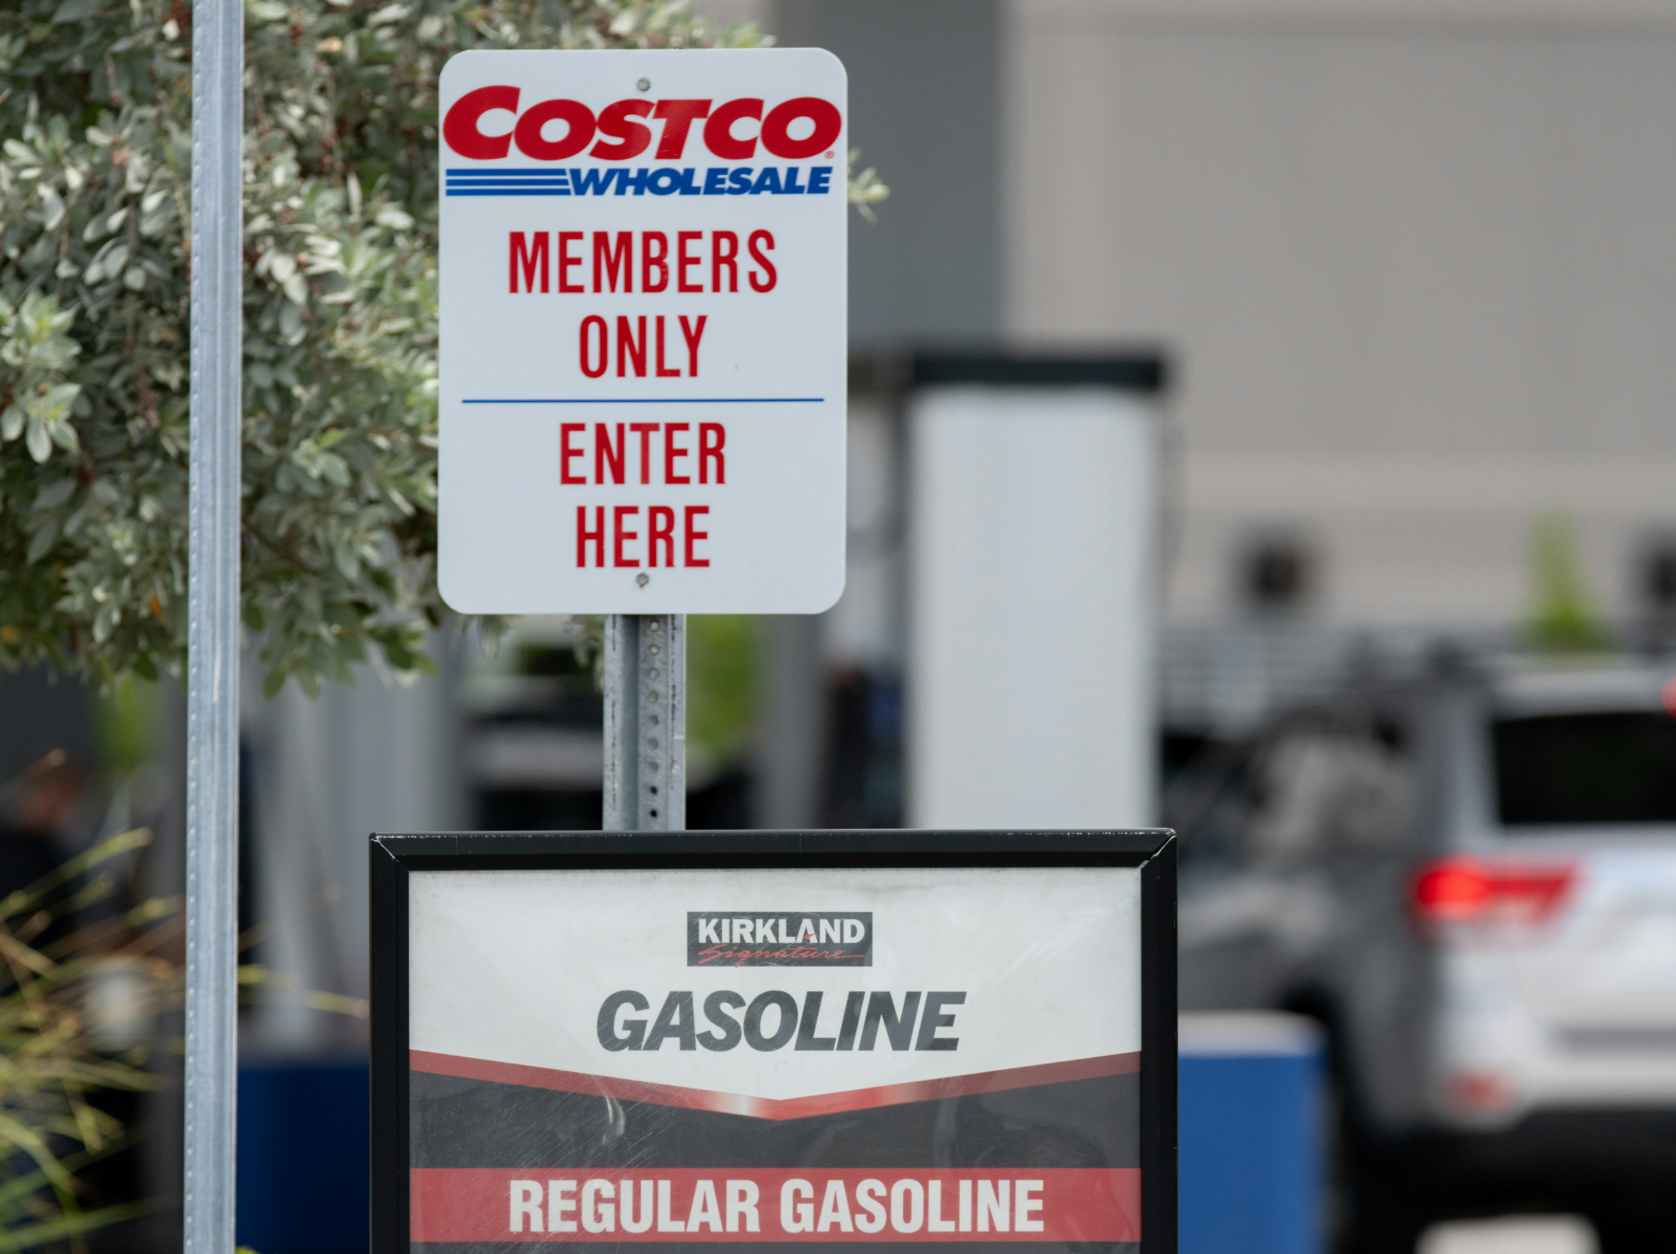 costco-gas-station-kirkland-signature-gasoline-members-only-sign-prices-dreamstime-april-2020